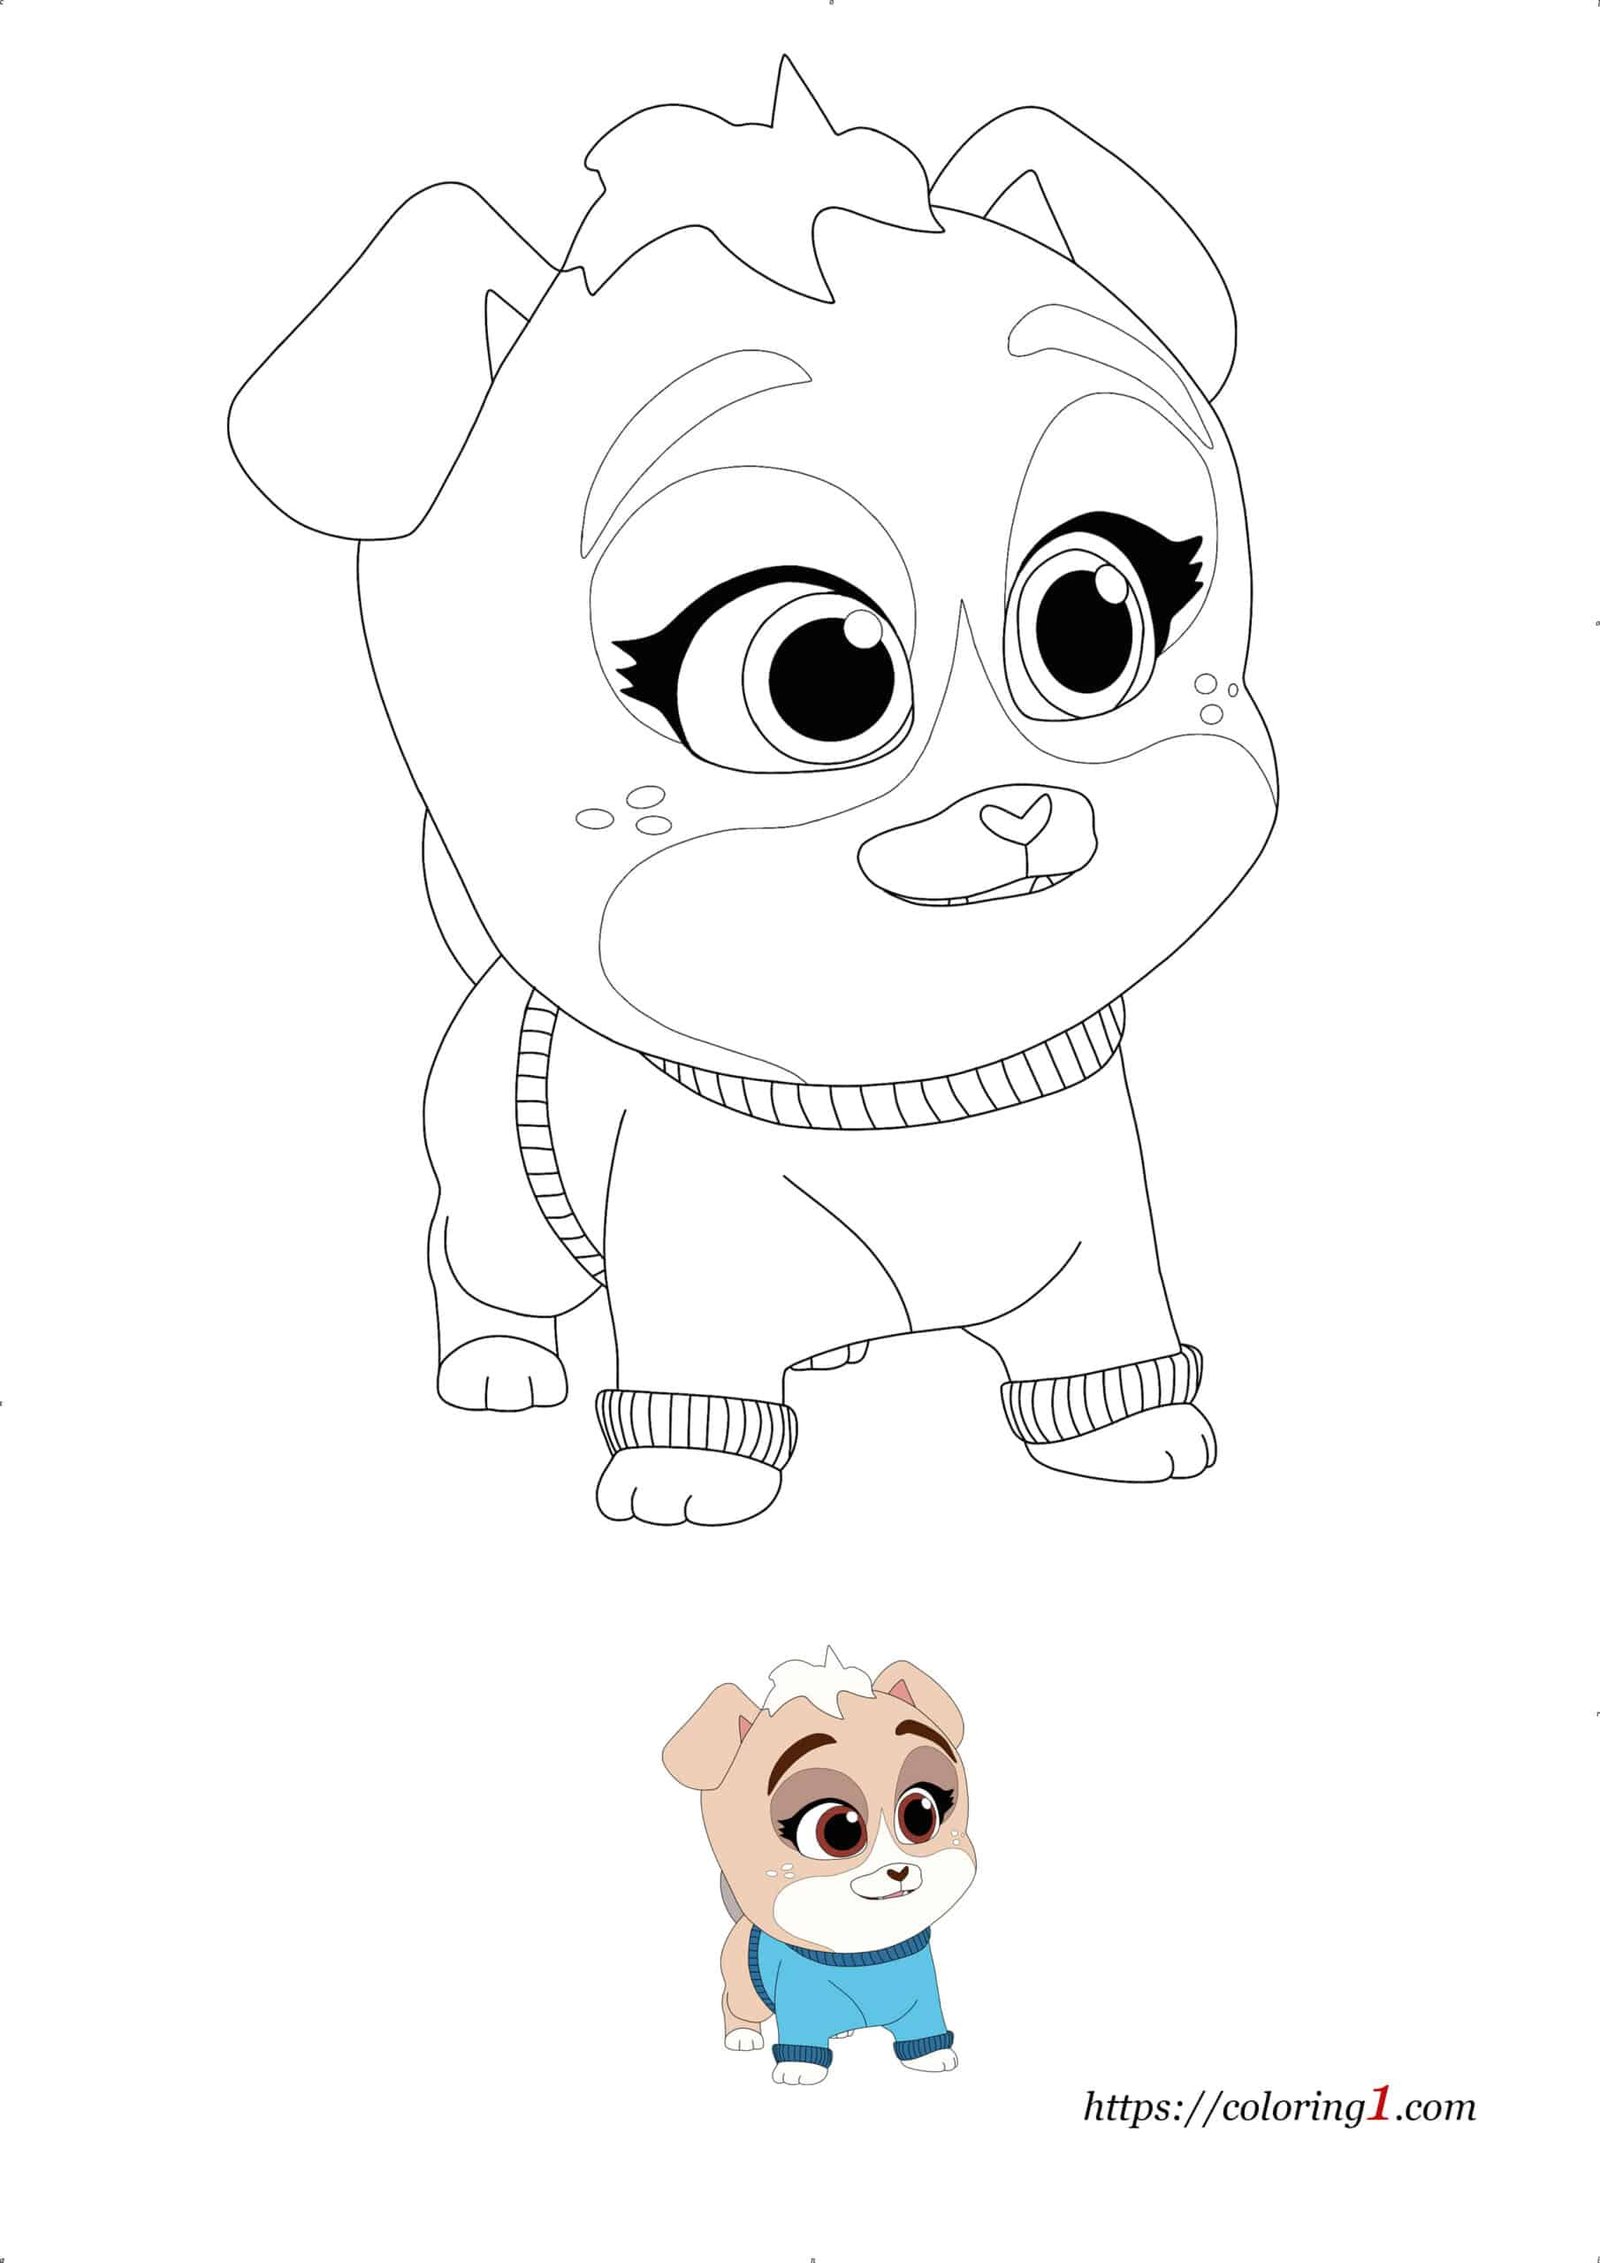 Puppy Dog Pals Keia printable coloring sheet for kids